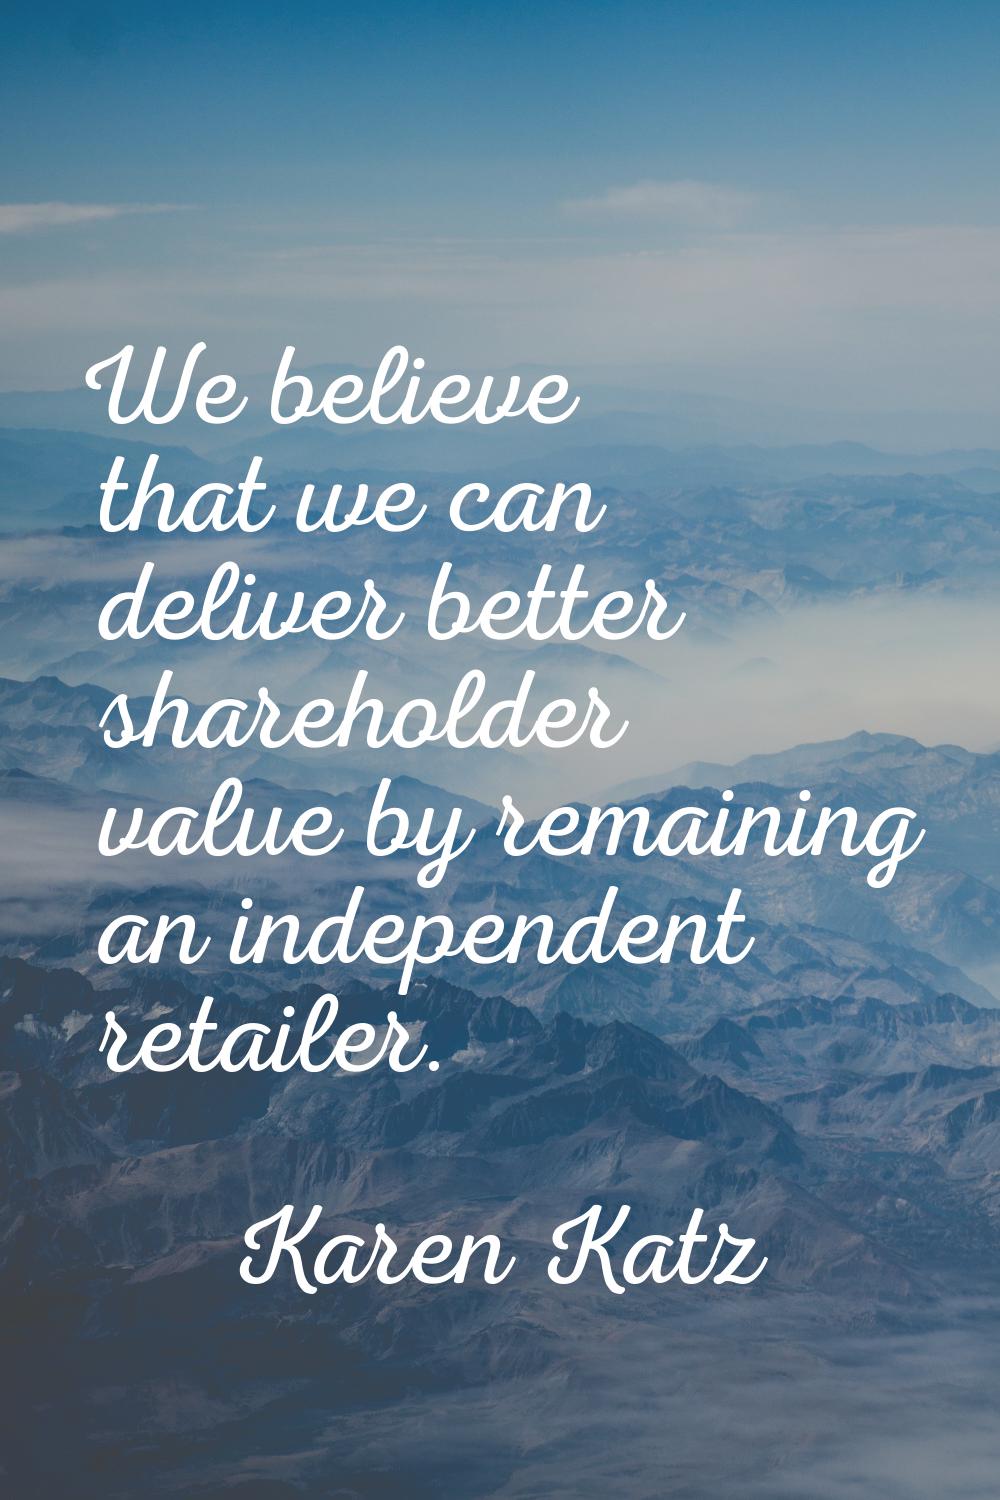 We believe that we can deliver better shareholder value by remaining an independent retailer.